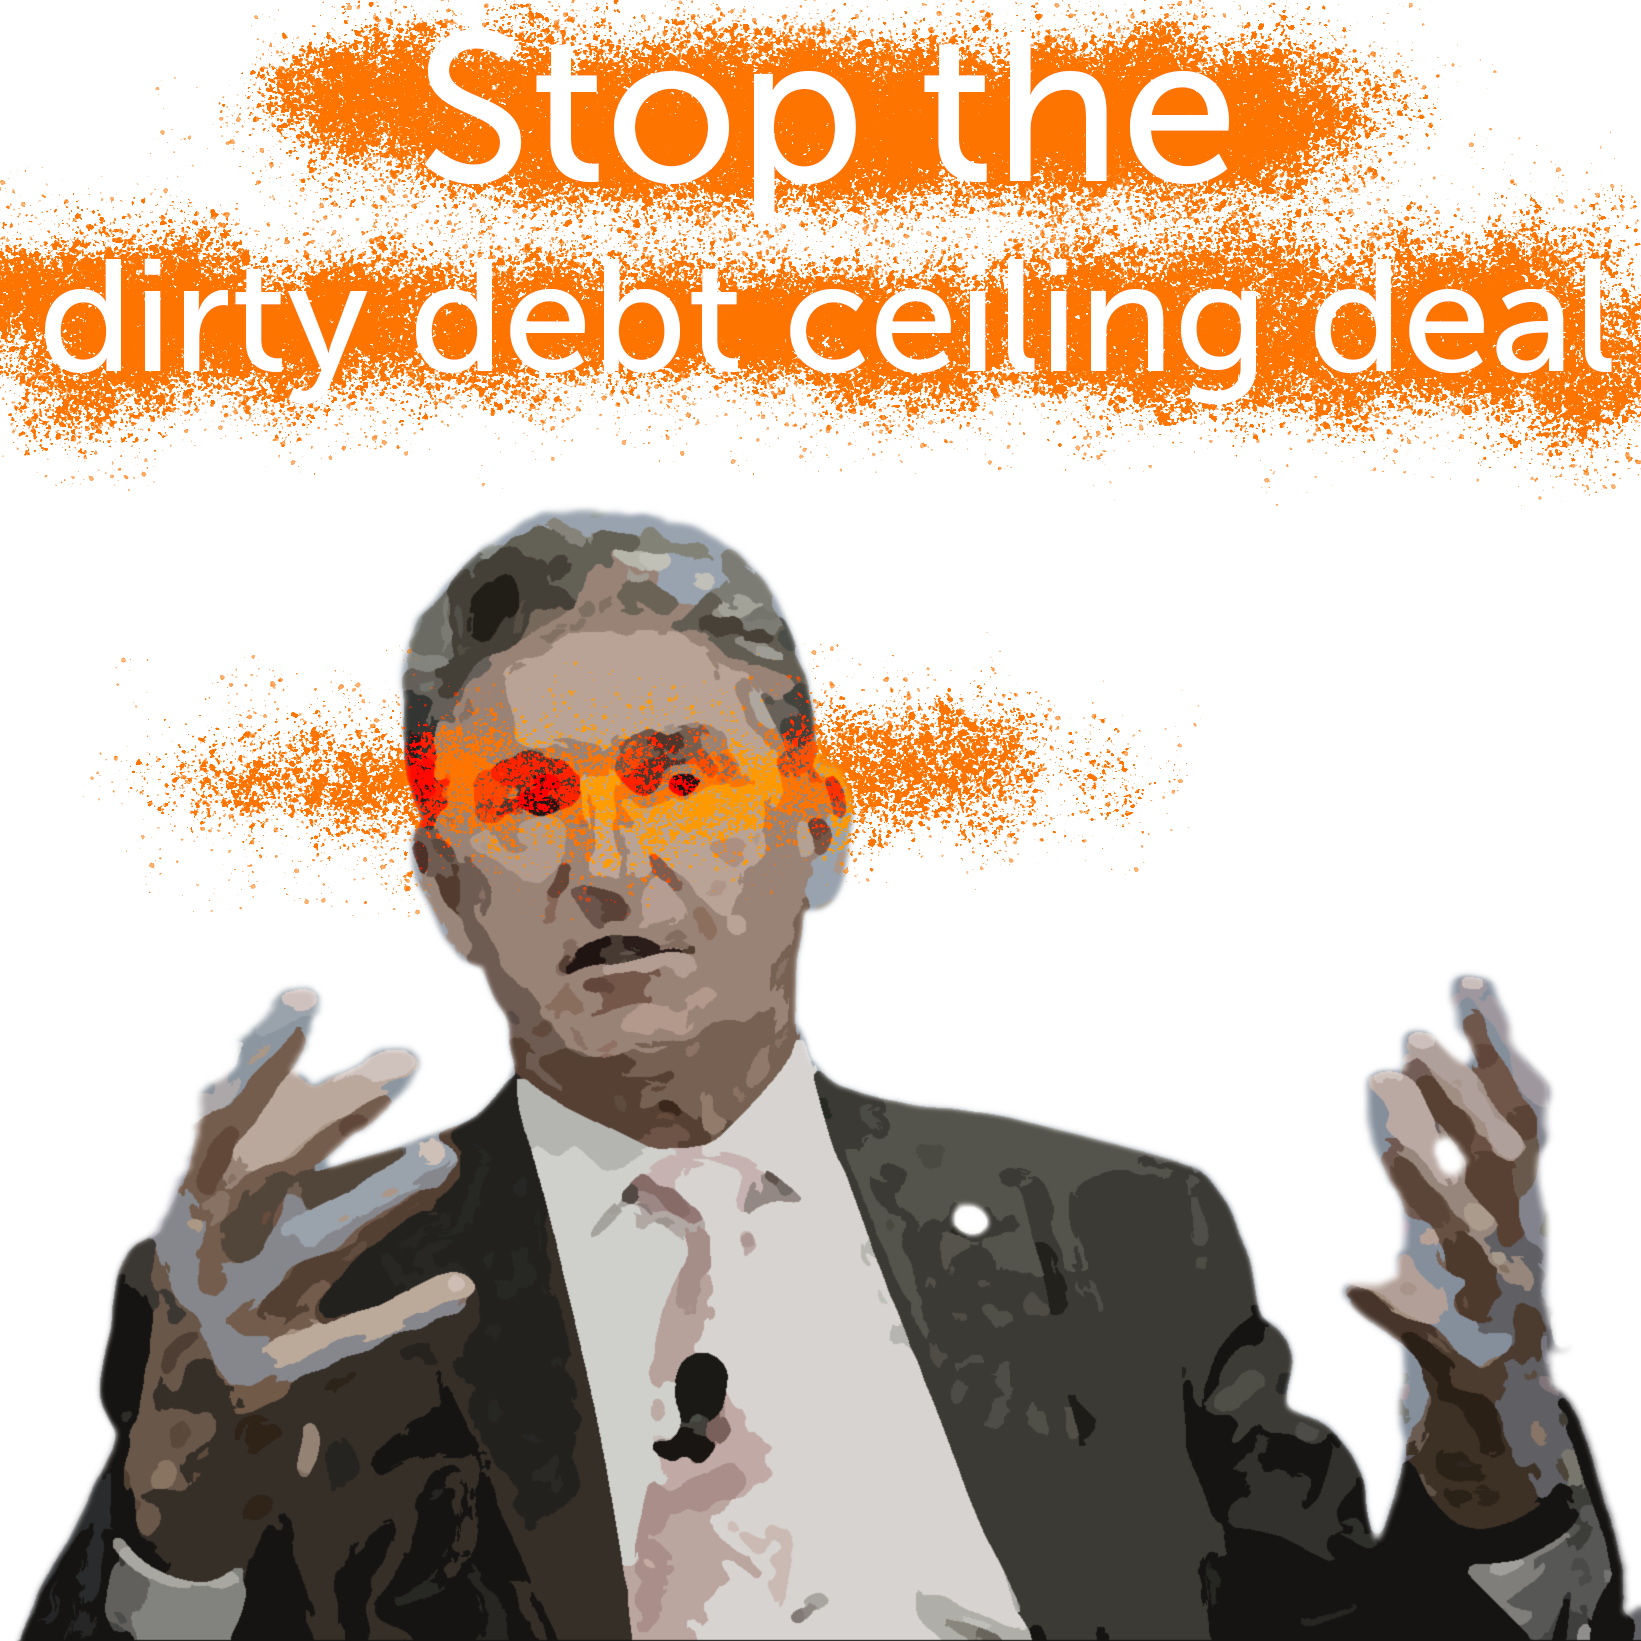 Sign now to stop Manchin's dirty debt ceiling deal